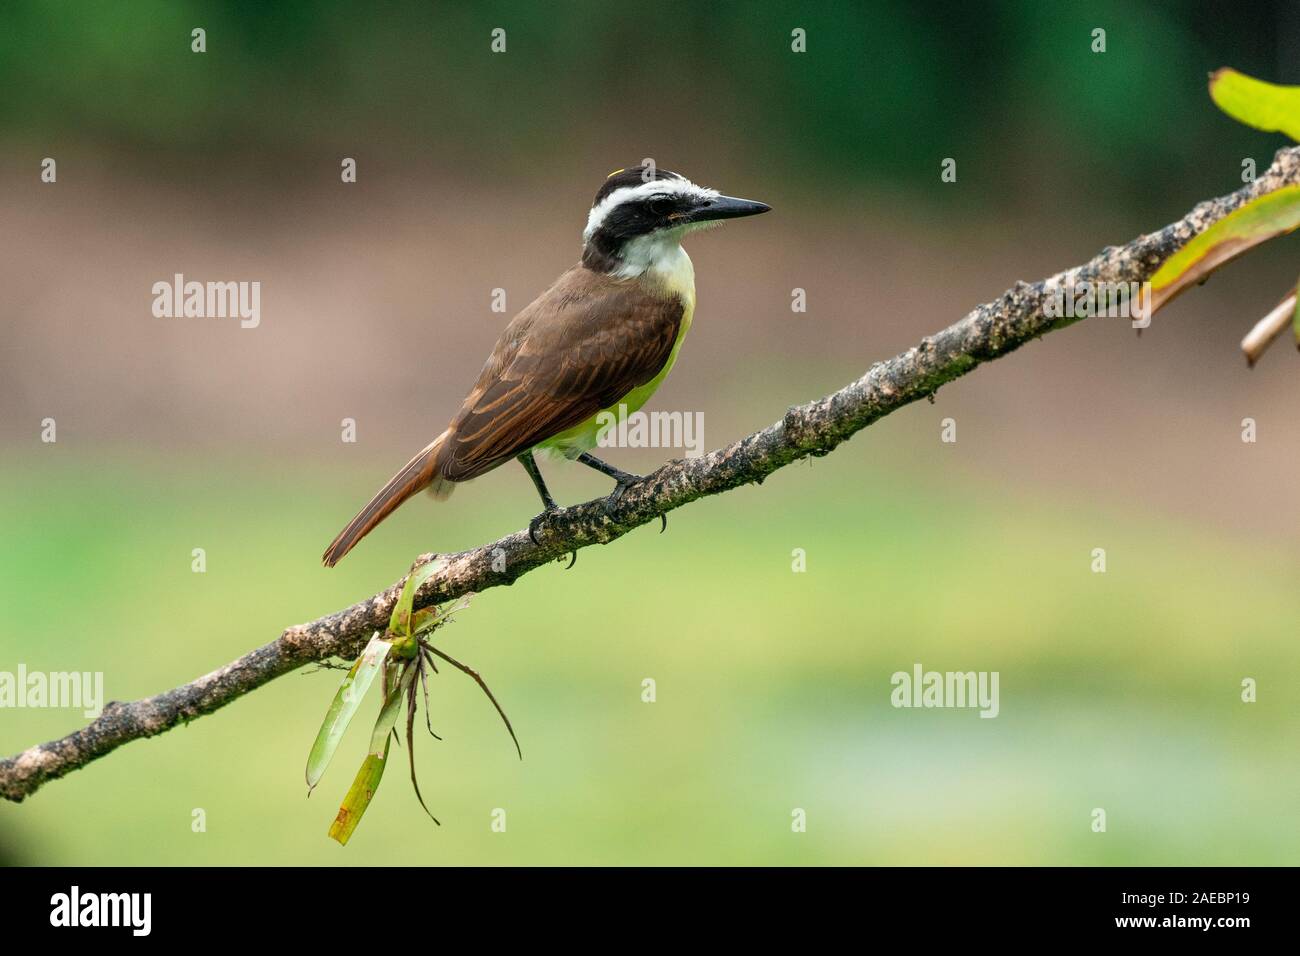 Great kiskadee on a branch. The great kiskadee (Pitangus sulphuratus) is a large tyrant flycatcher that is found from the Lower Rio Grande Valley in s Stock Photo